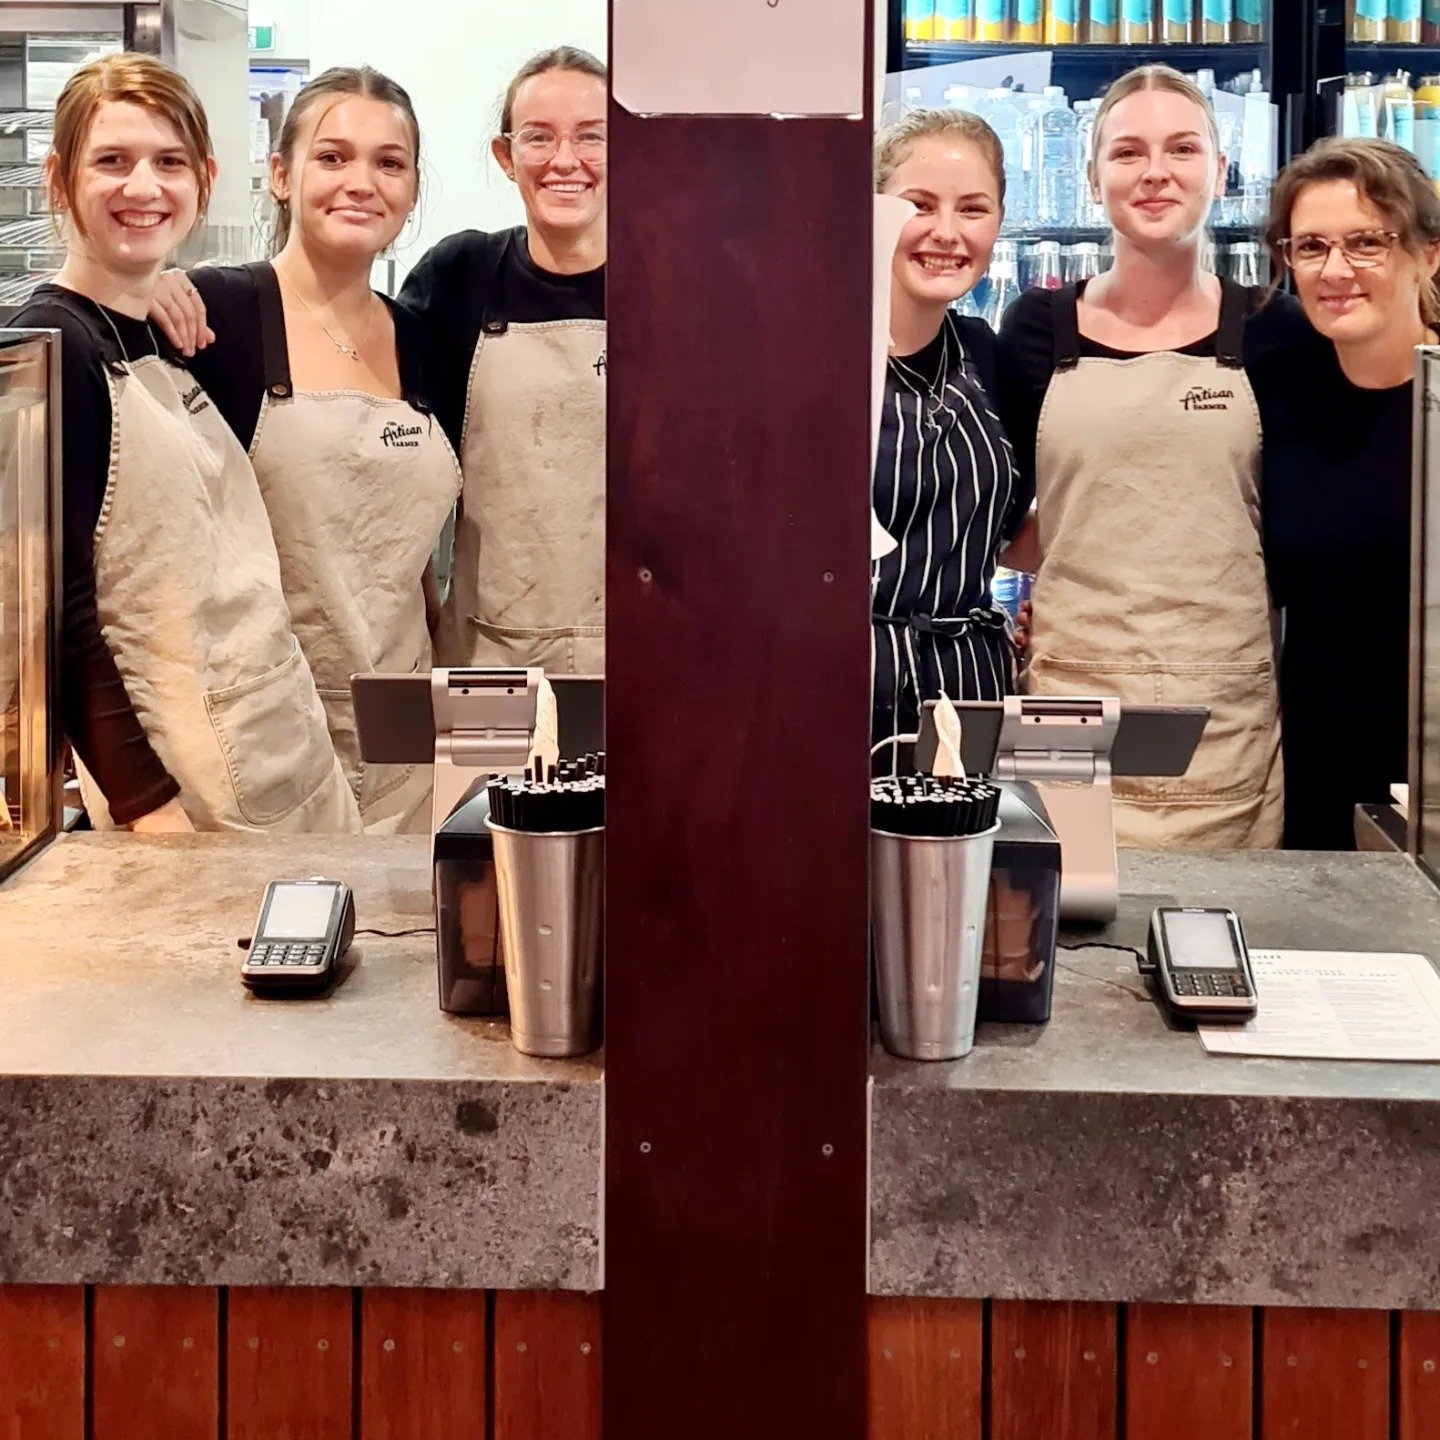 They're still smiling,  even after a busy day - we're so fortunate to have such wonderful staff!

#frontofhouse #welcomecommittee #cafestaff #waitress #cafe #theartisanfarmernabiac #nabiac #barringtoncoast #midnorthcoastnsw